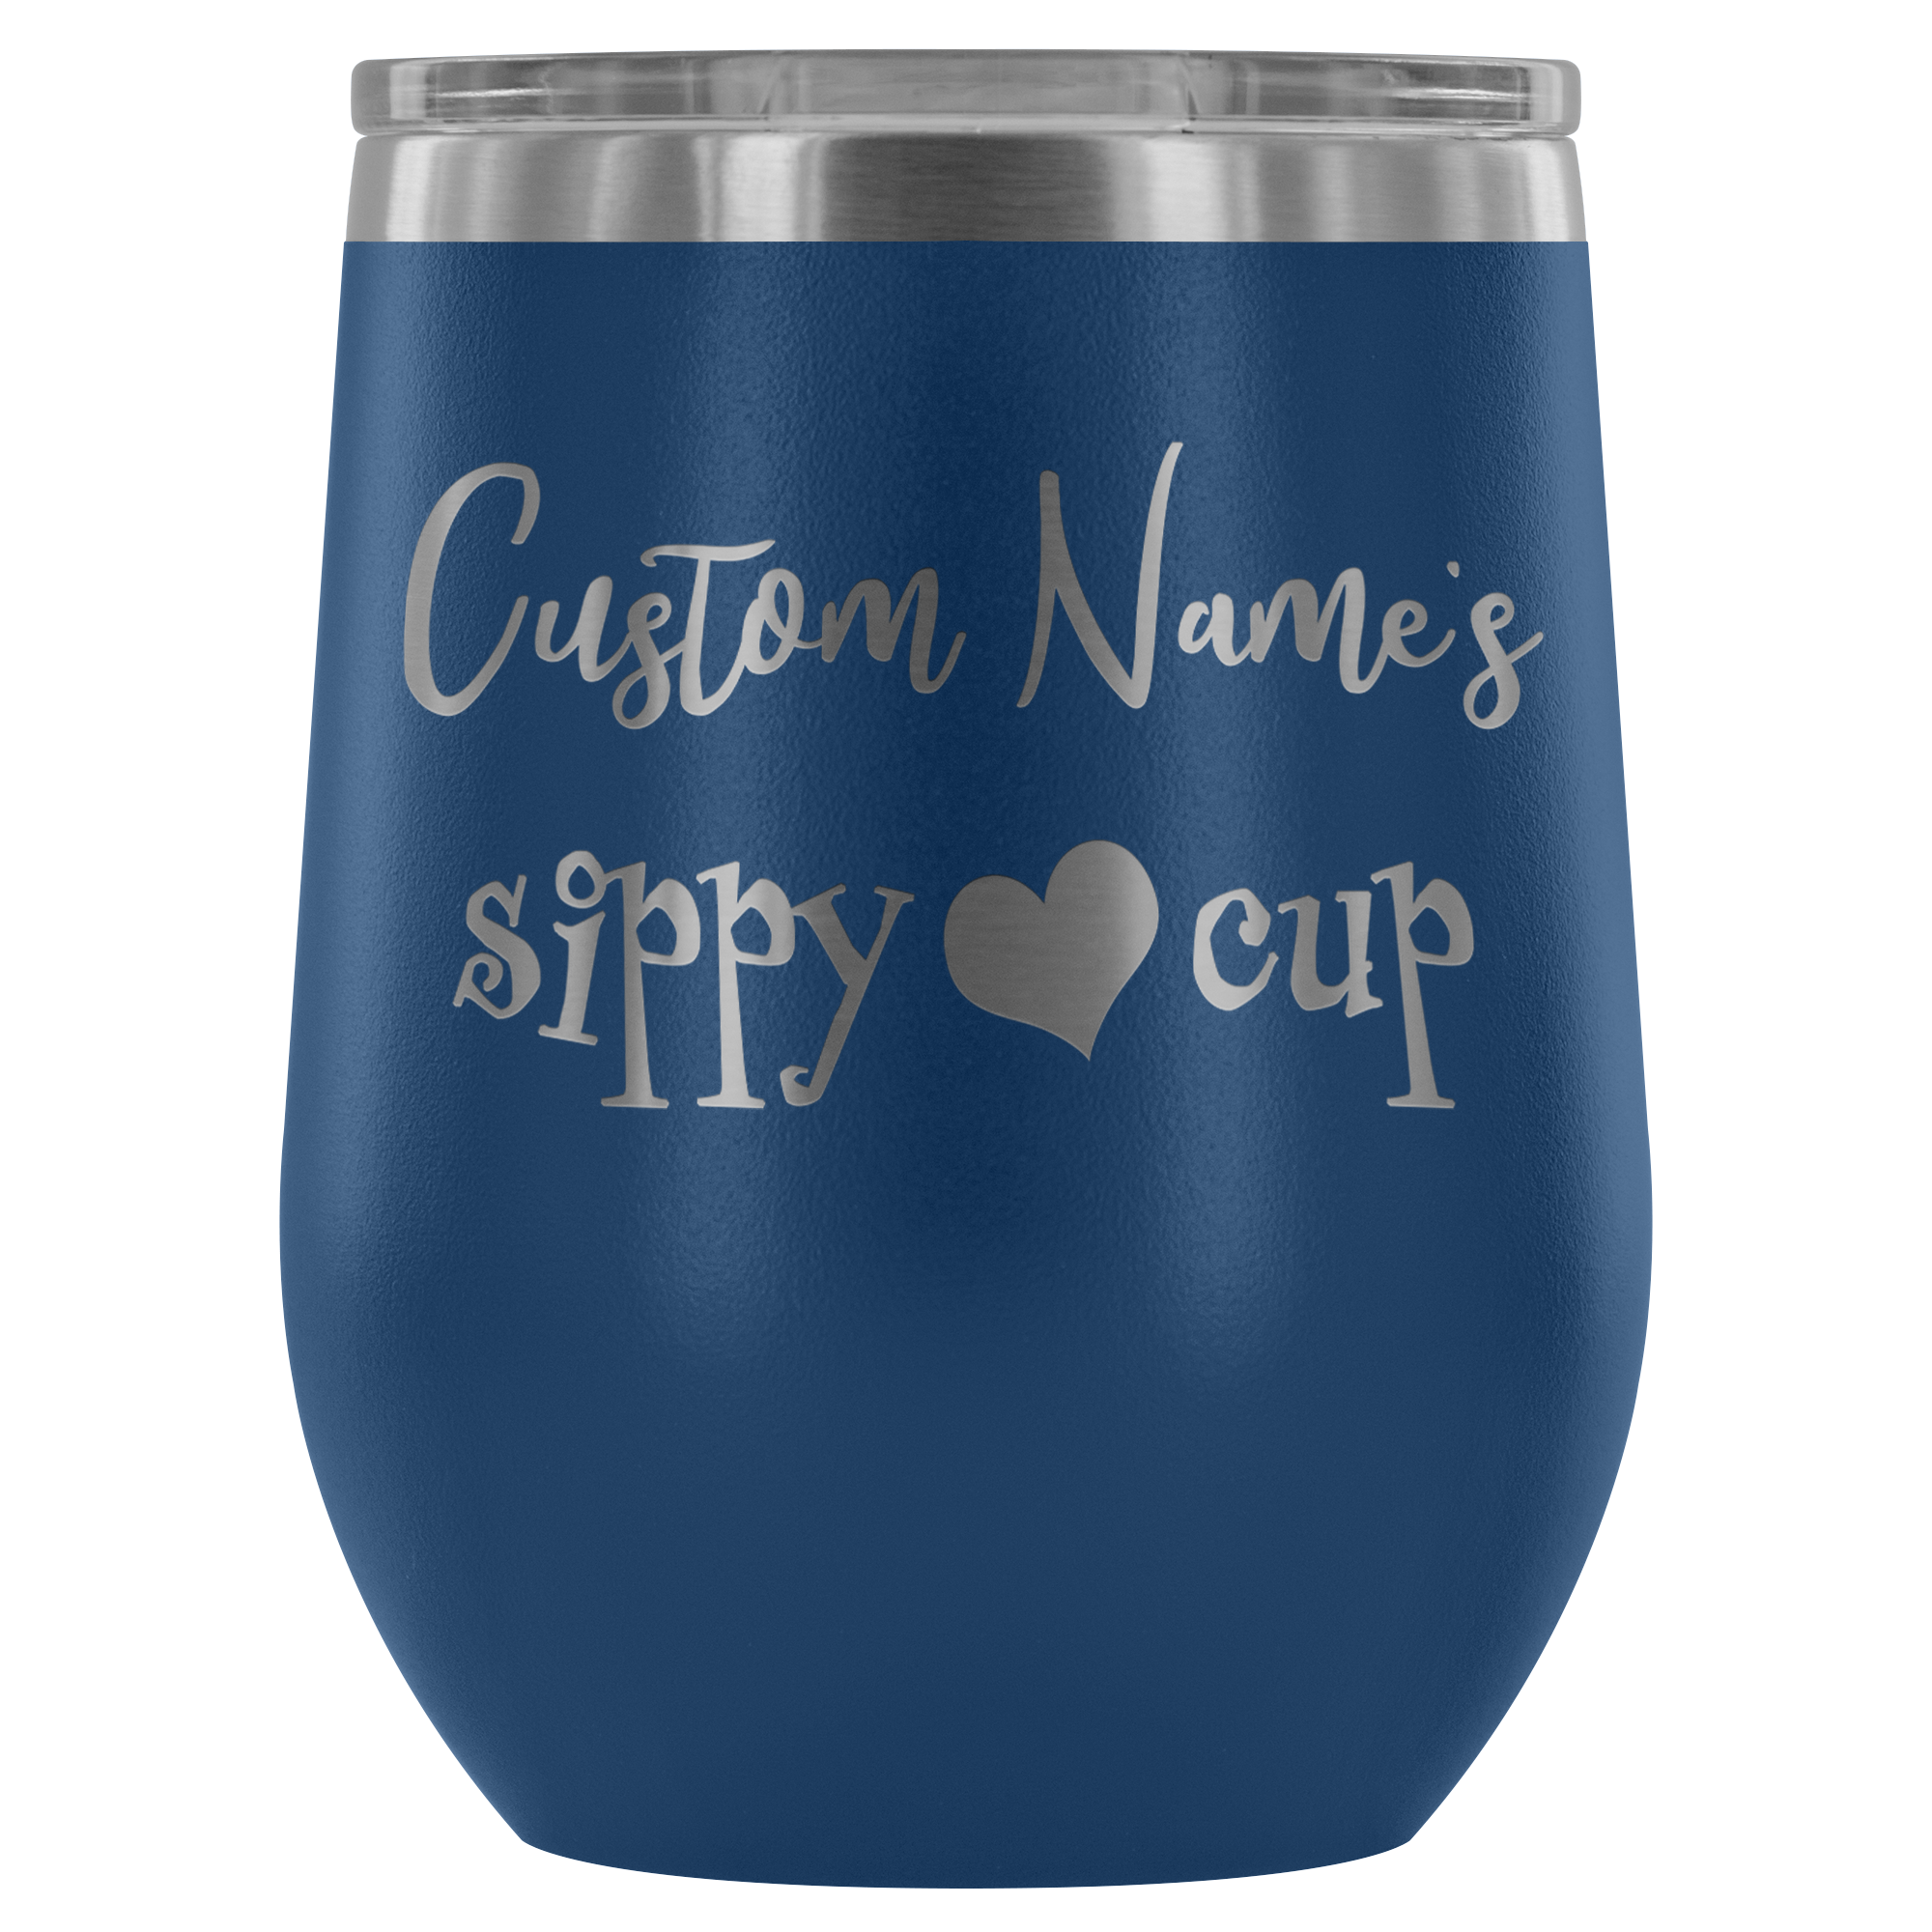 Personalized, wine, sippy cup